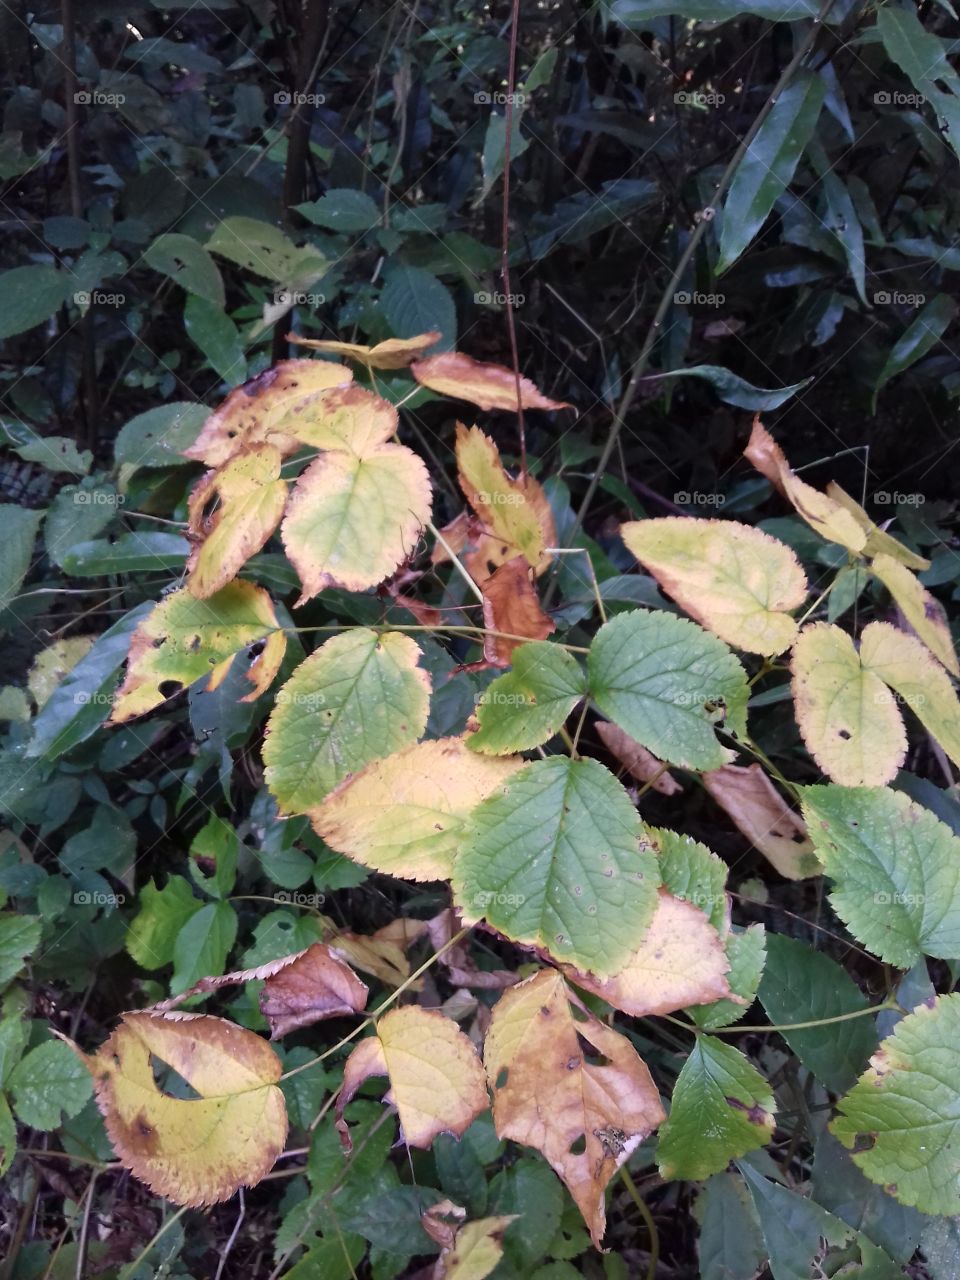 leaves in  January yellowing and drying while some remain defying witer chill